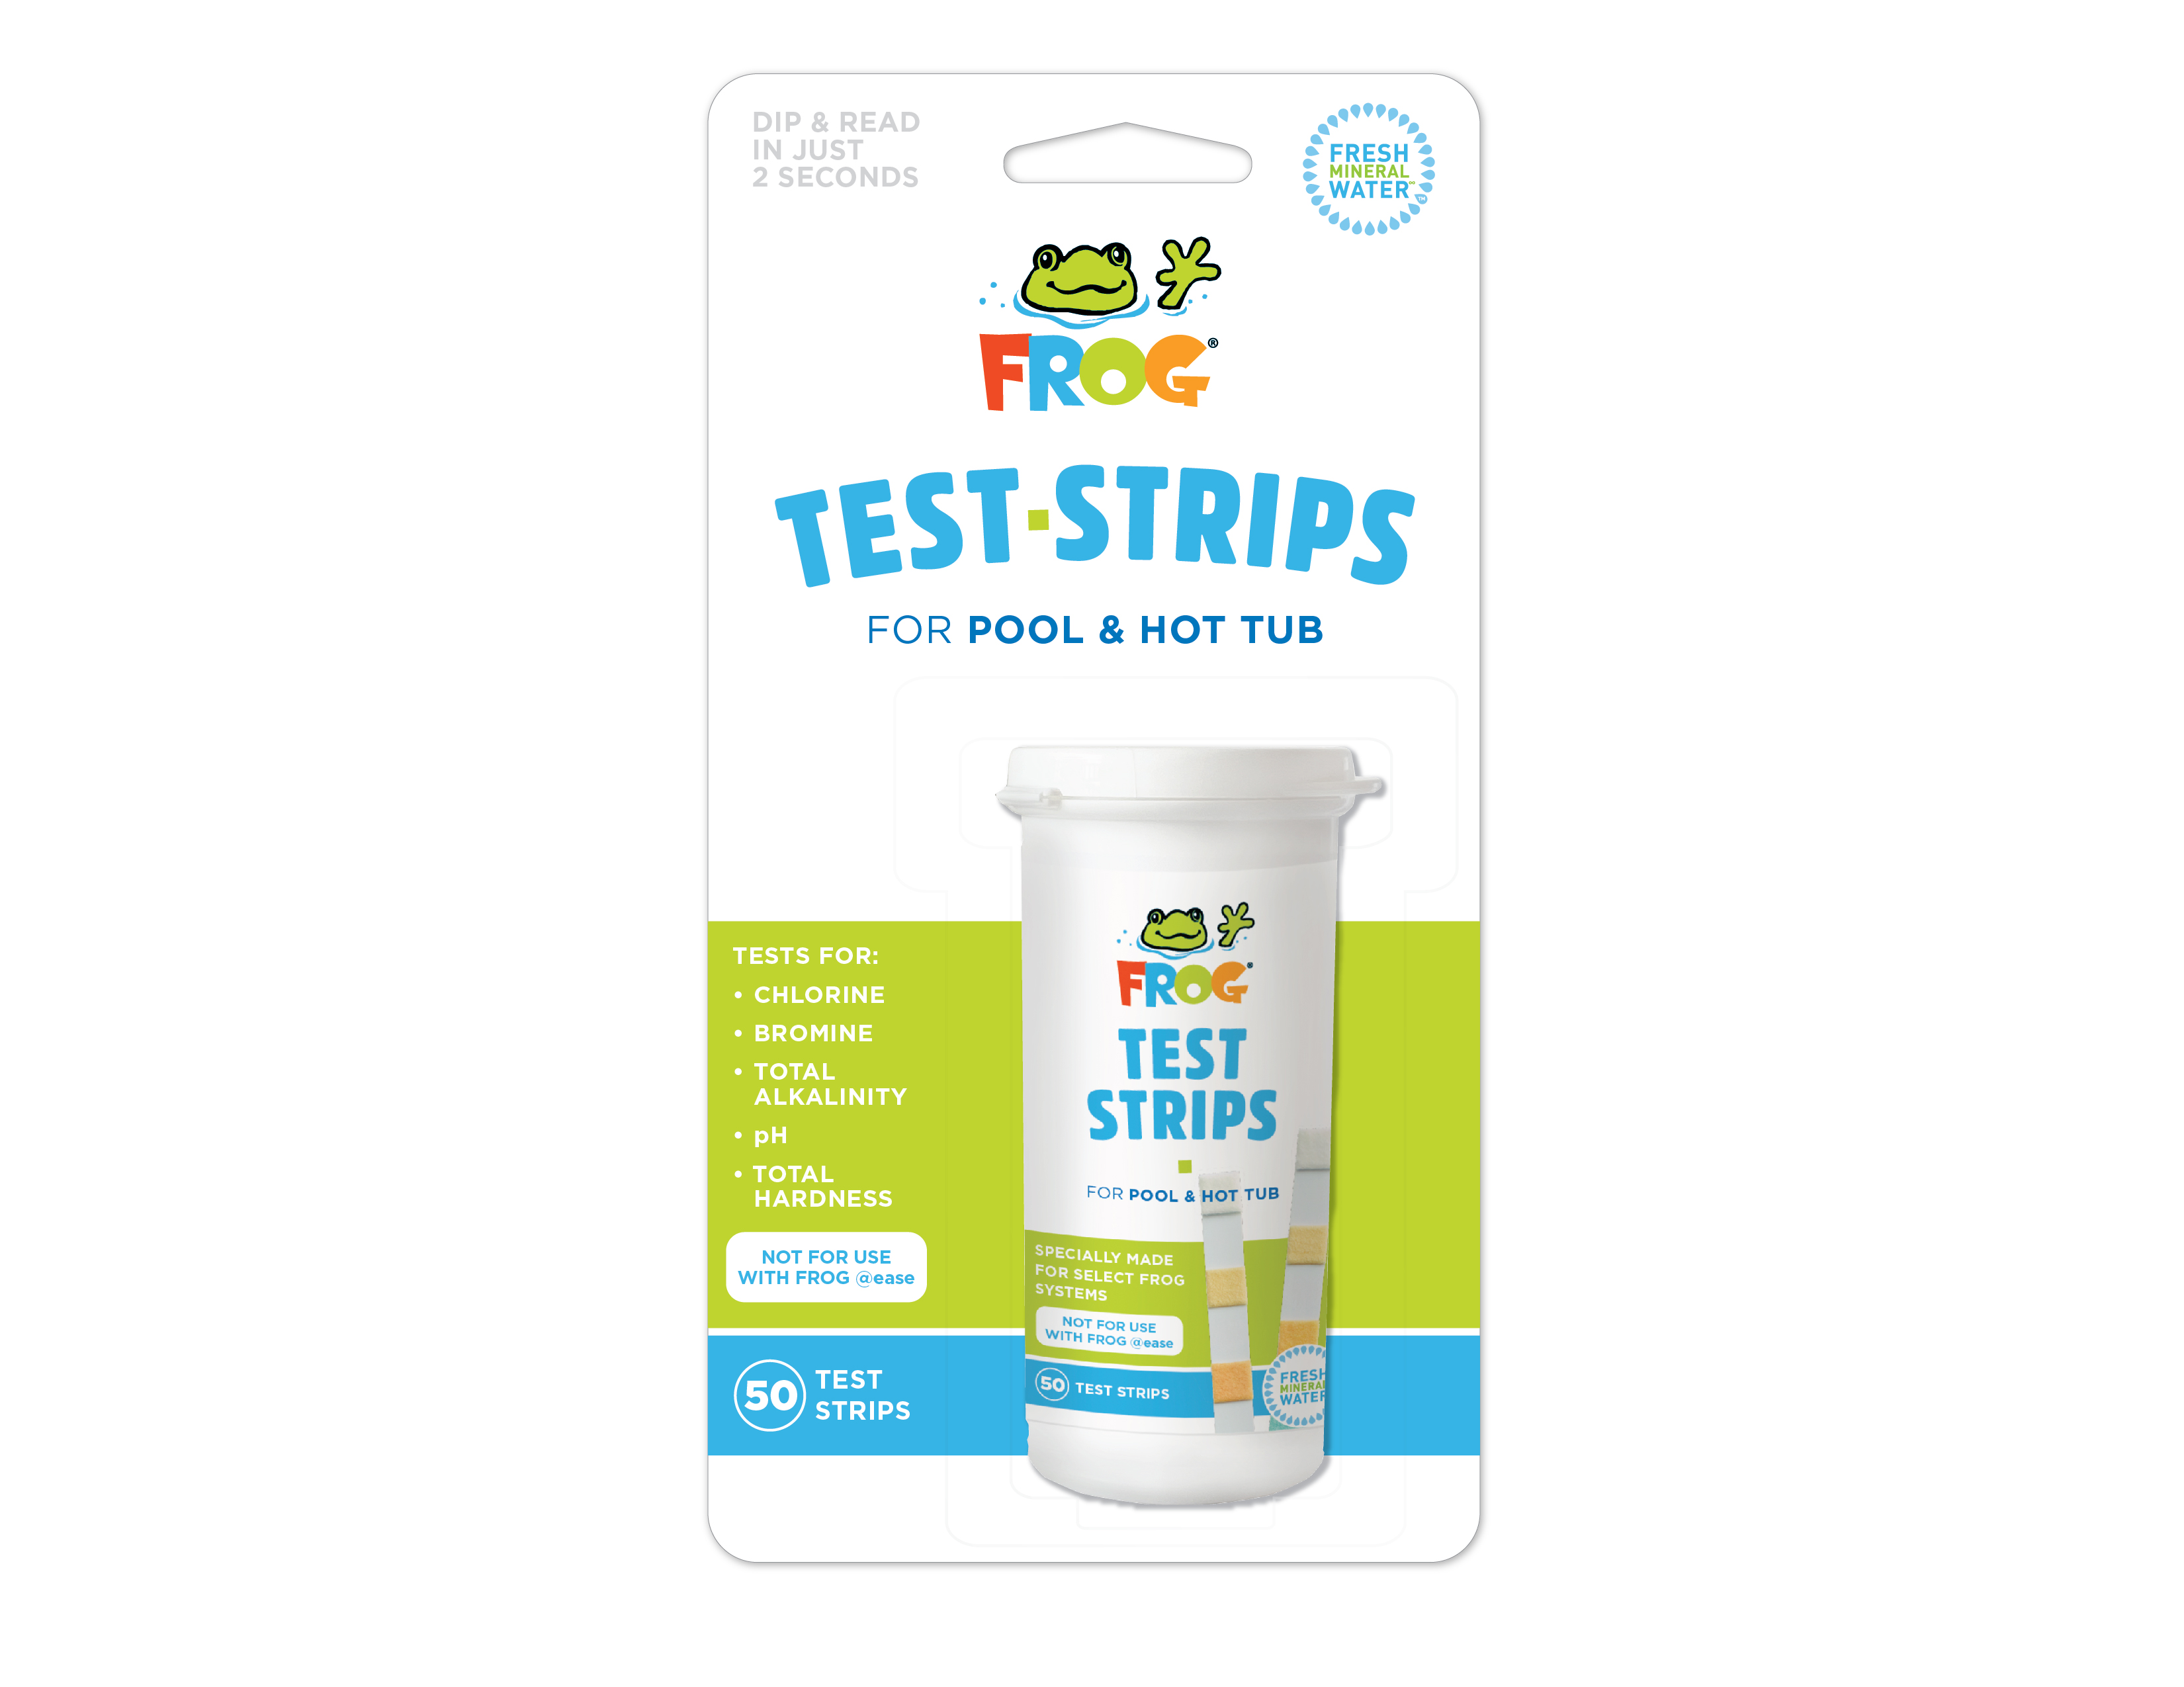 Frog Test Strips 50 Count Bottle - CLEARANCE SAFETY COVERS